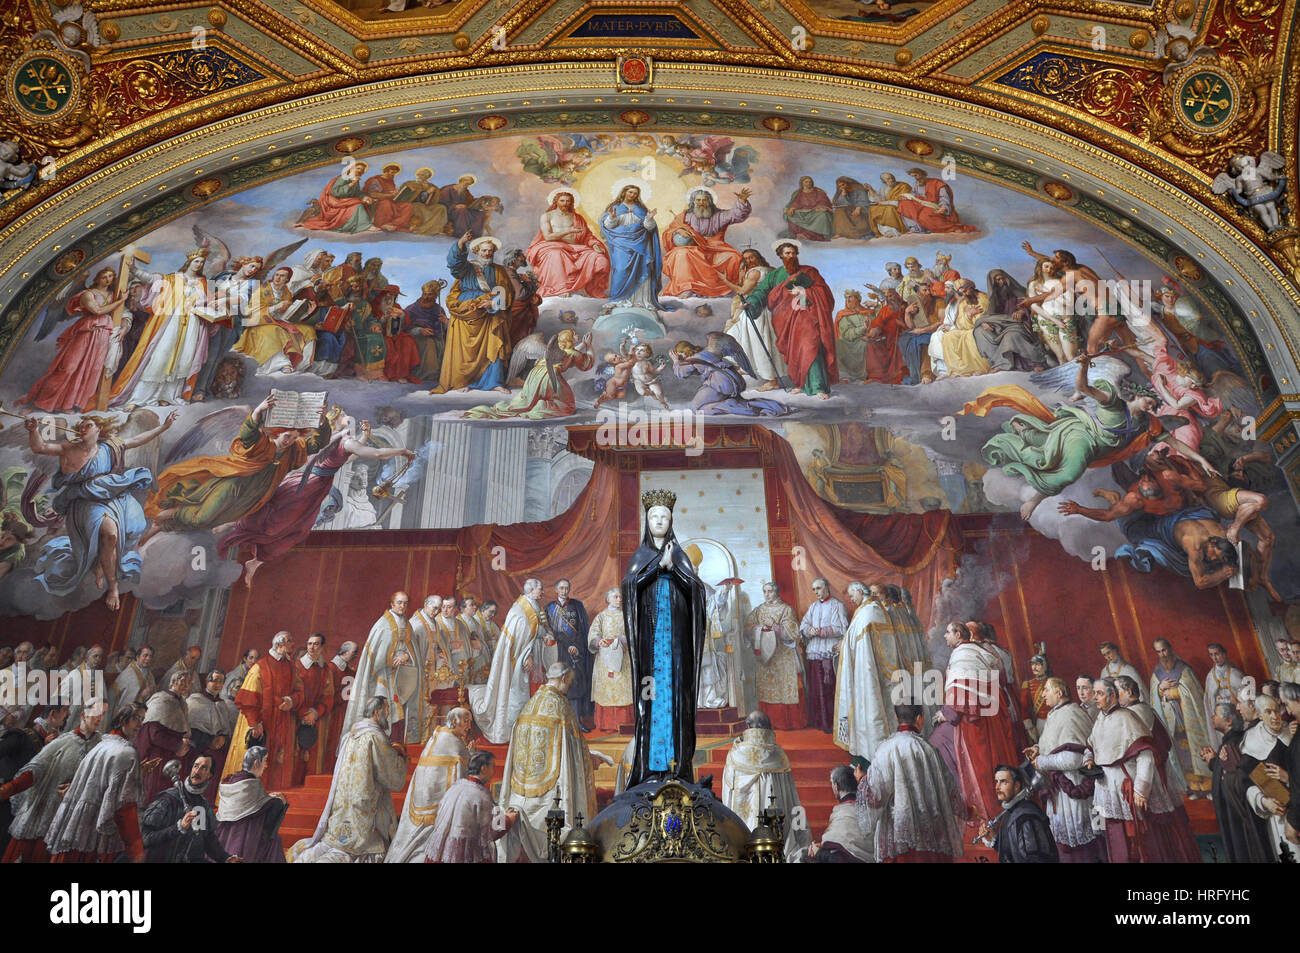 VATICAN, ITALY - MARCH 14, 2016: The paintings in the Vatican's Stanze di Raffaello (Raphael Rooms) are a series of papal apartments frescoed by Rapha Stock Photo